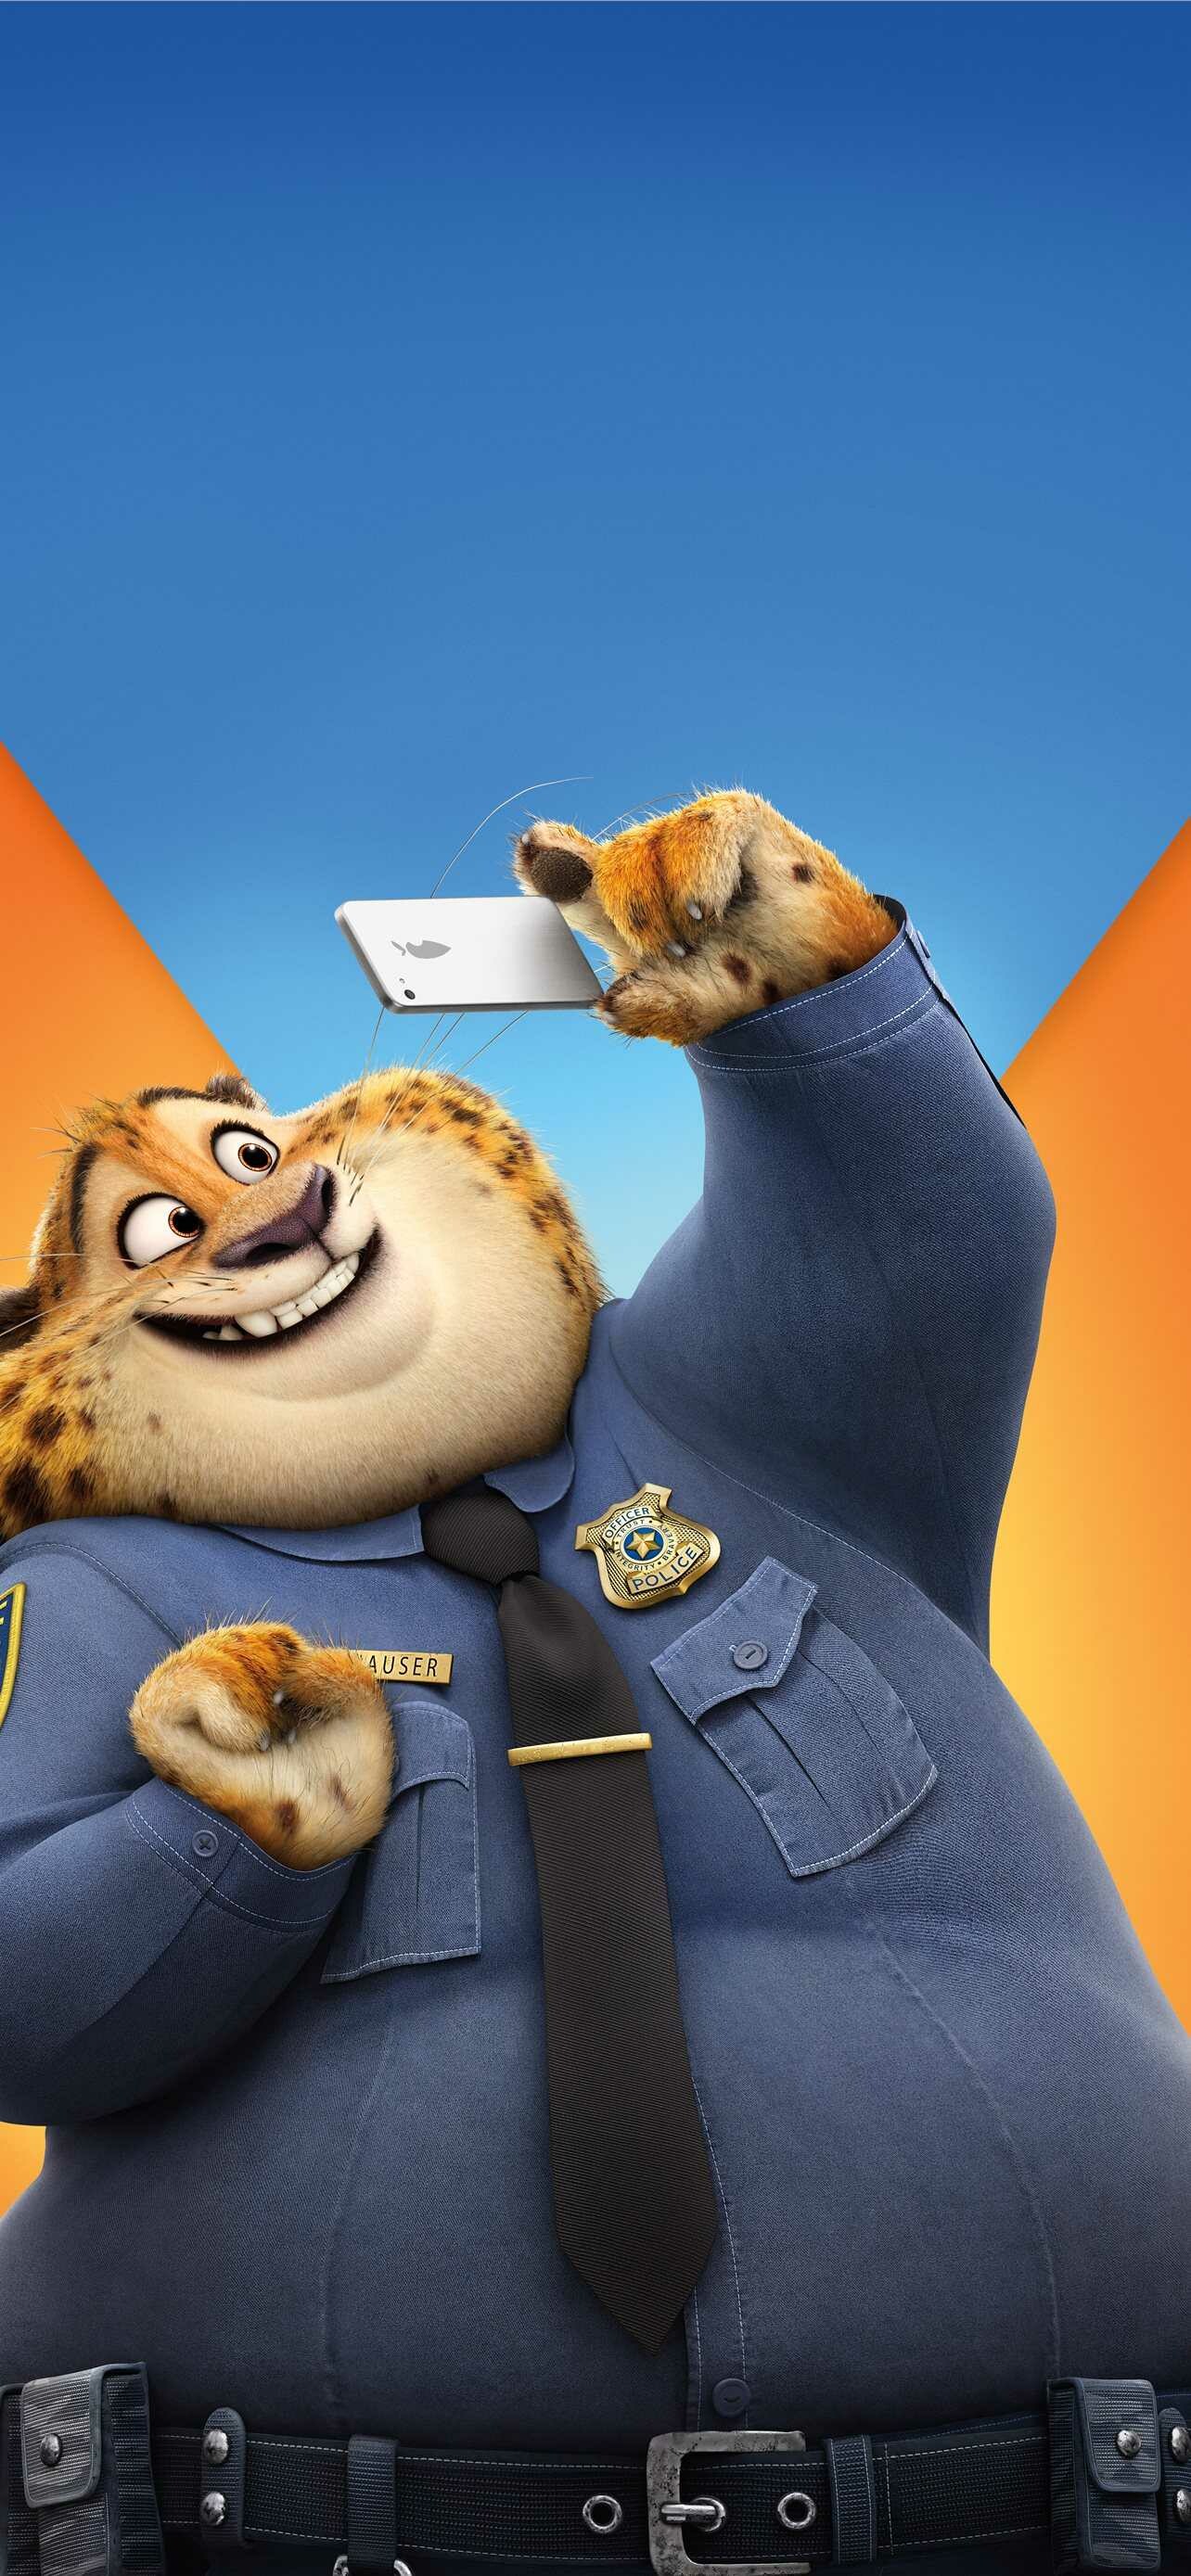 Zootopia: Nate Torrence as Benjamin Clawhauser, An obese cheetah who works as a dispatcher and desk sergeant for the Police Department's 1st Precinct. 1290x2780 HD Background.